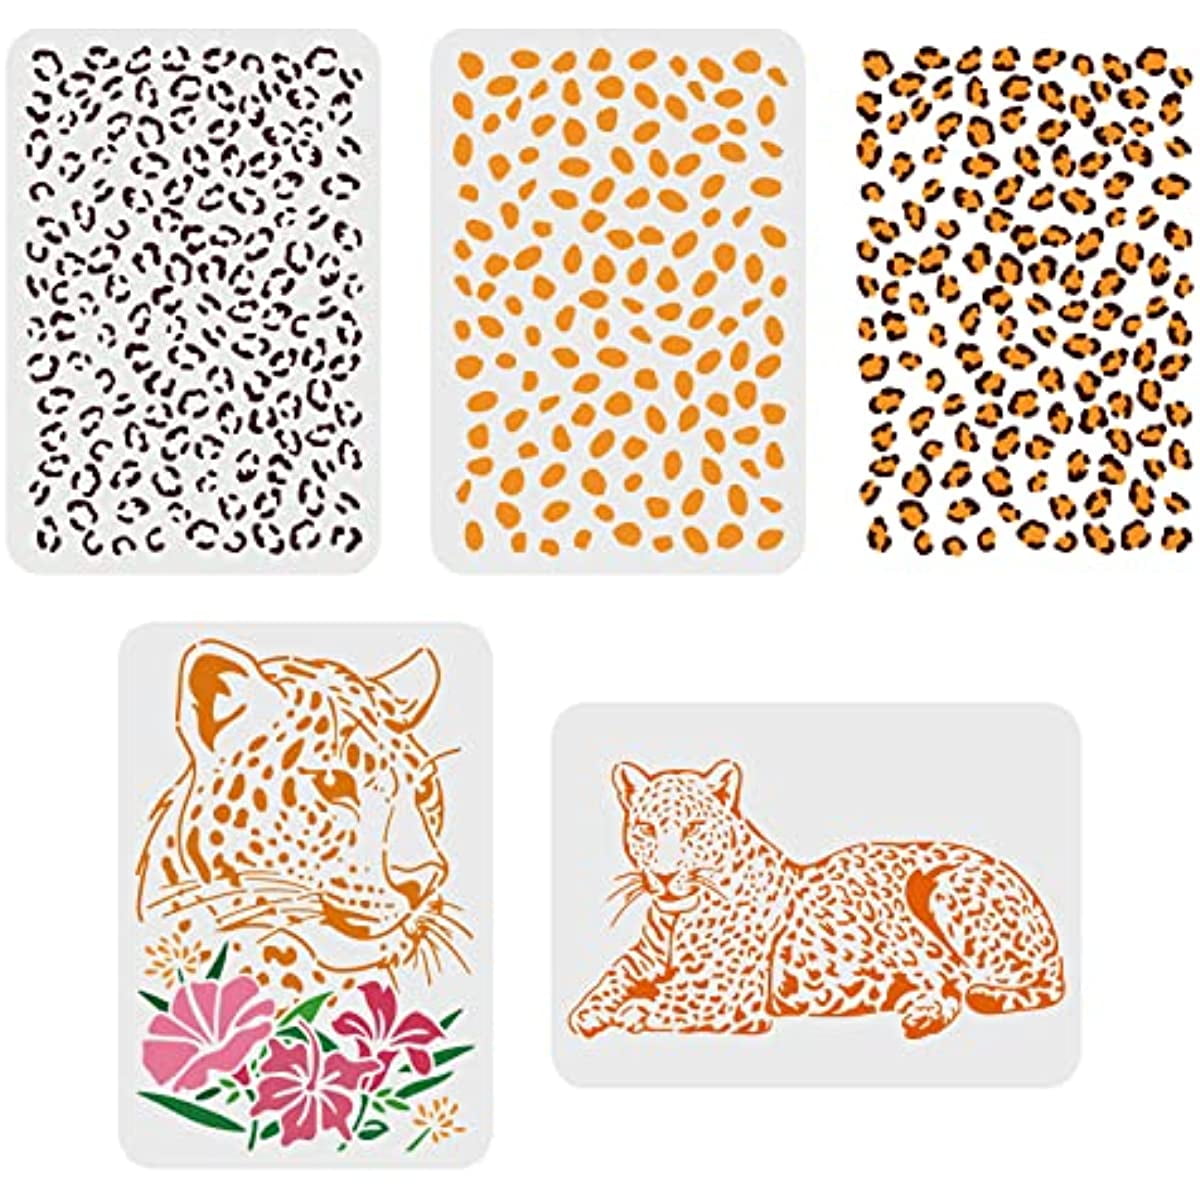 4 Pcs Cheetah Leopard Print Stencils A4 Size  inch Flower Panther  Pattern Stencil Reusable DIY Animal Template for Painting on Crafts Wood  Fabric Wall Furniture Home Decor 